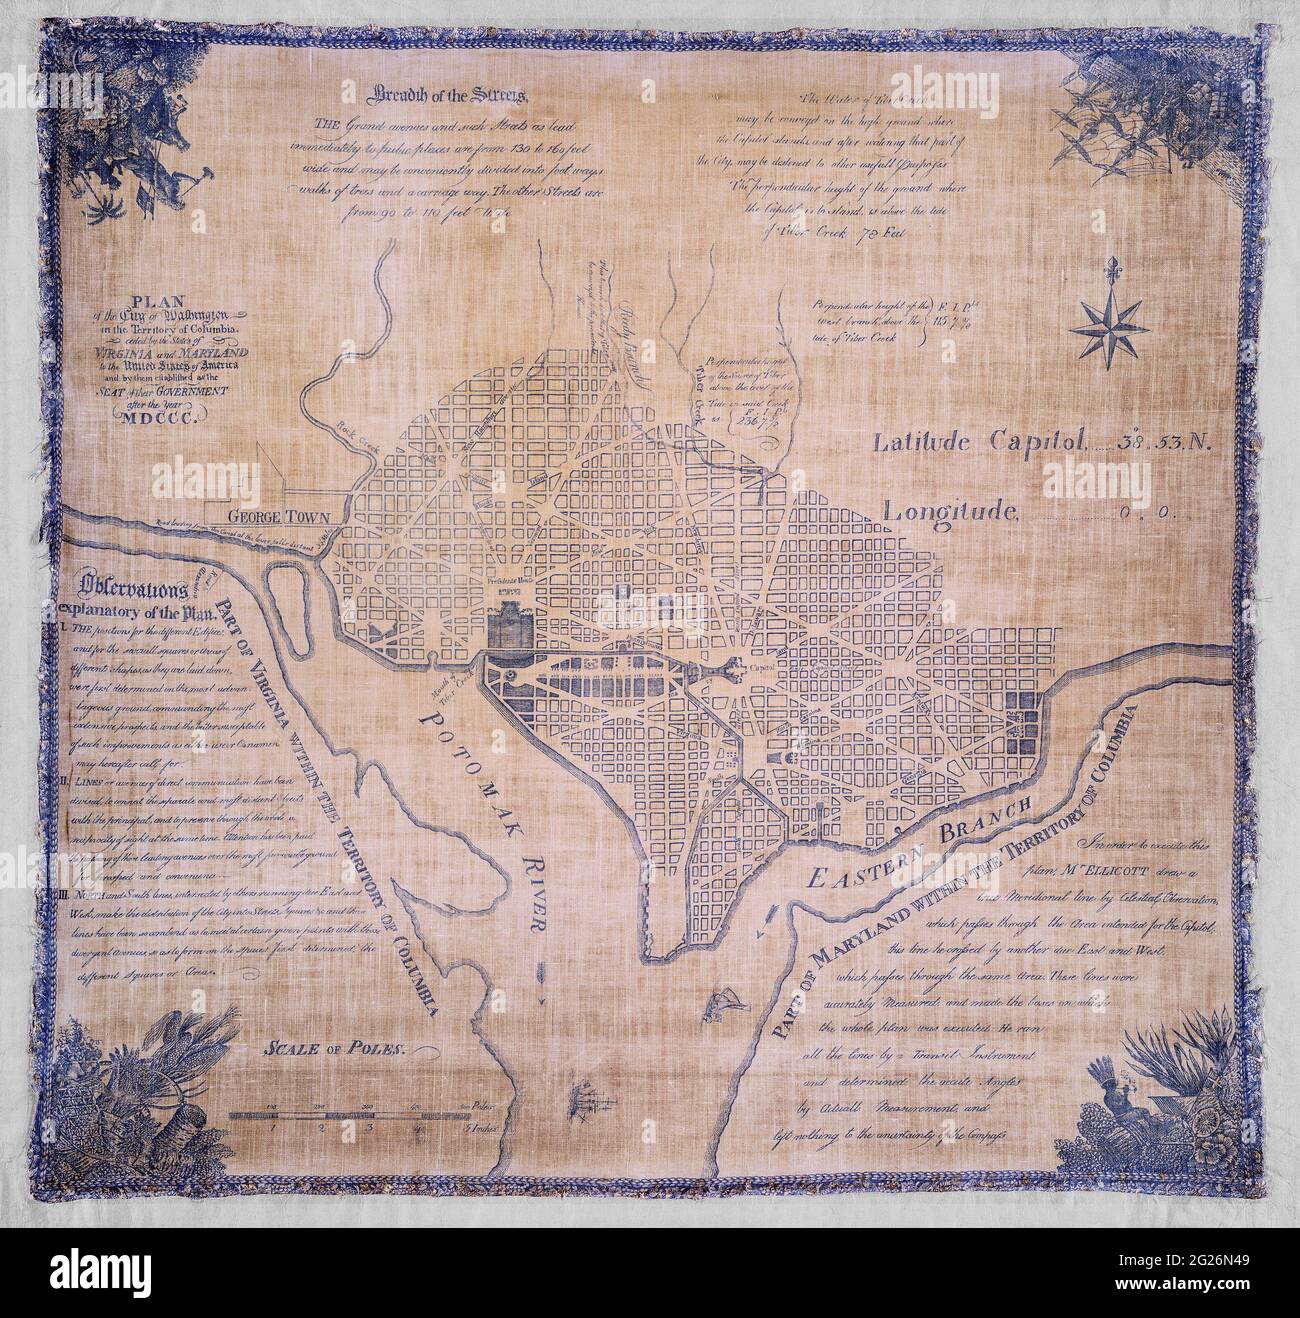 Original title: 'Plan of the city of Washington in the territory of Columbia : ceded by the states of Virginia and Maryland to the United States of America and by them established as the seat of their government after the year MDCCC.' This is an enhanced, reintroduction of an historical cloth map showing the formation of the District of Columbia. Includes extensive historical notes. Surveyor: Andrew Ellicott. Dated as 1792. Stock Photo